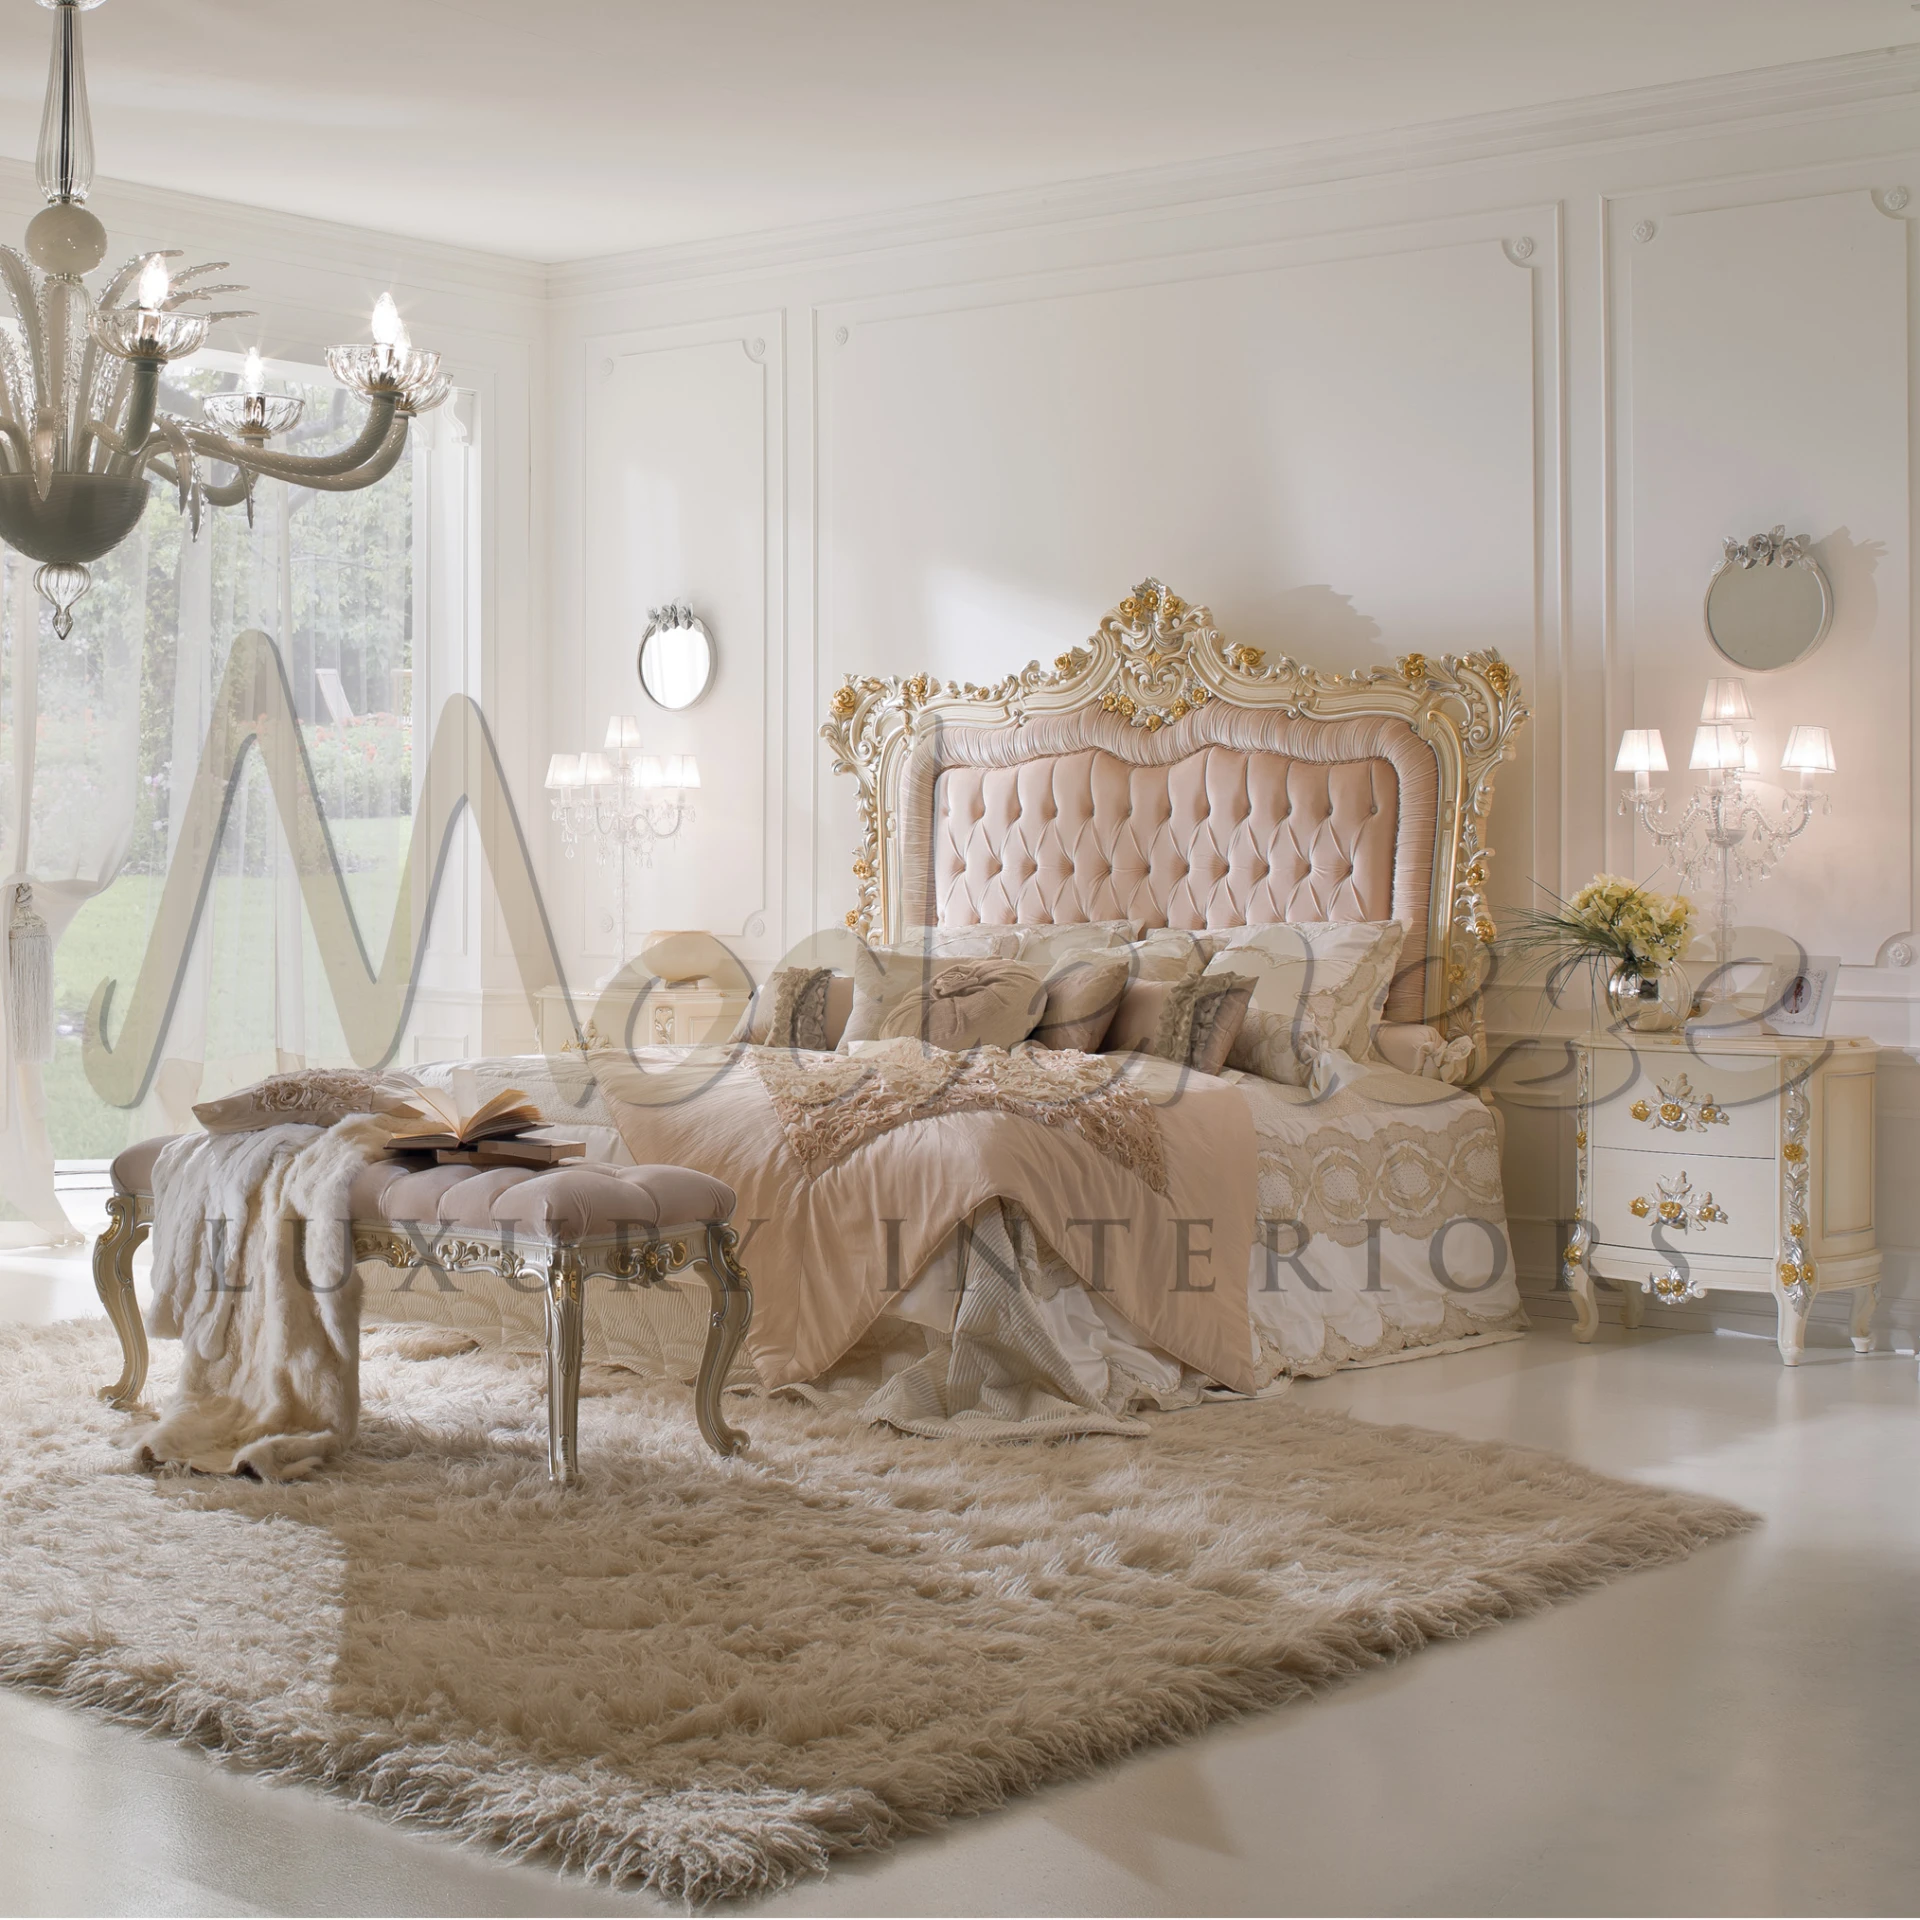 Experience luxury lounging with our Cream Bed Bench, crafted with Italian design finesse for a touch of sophistication.